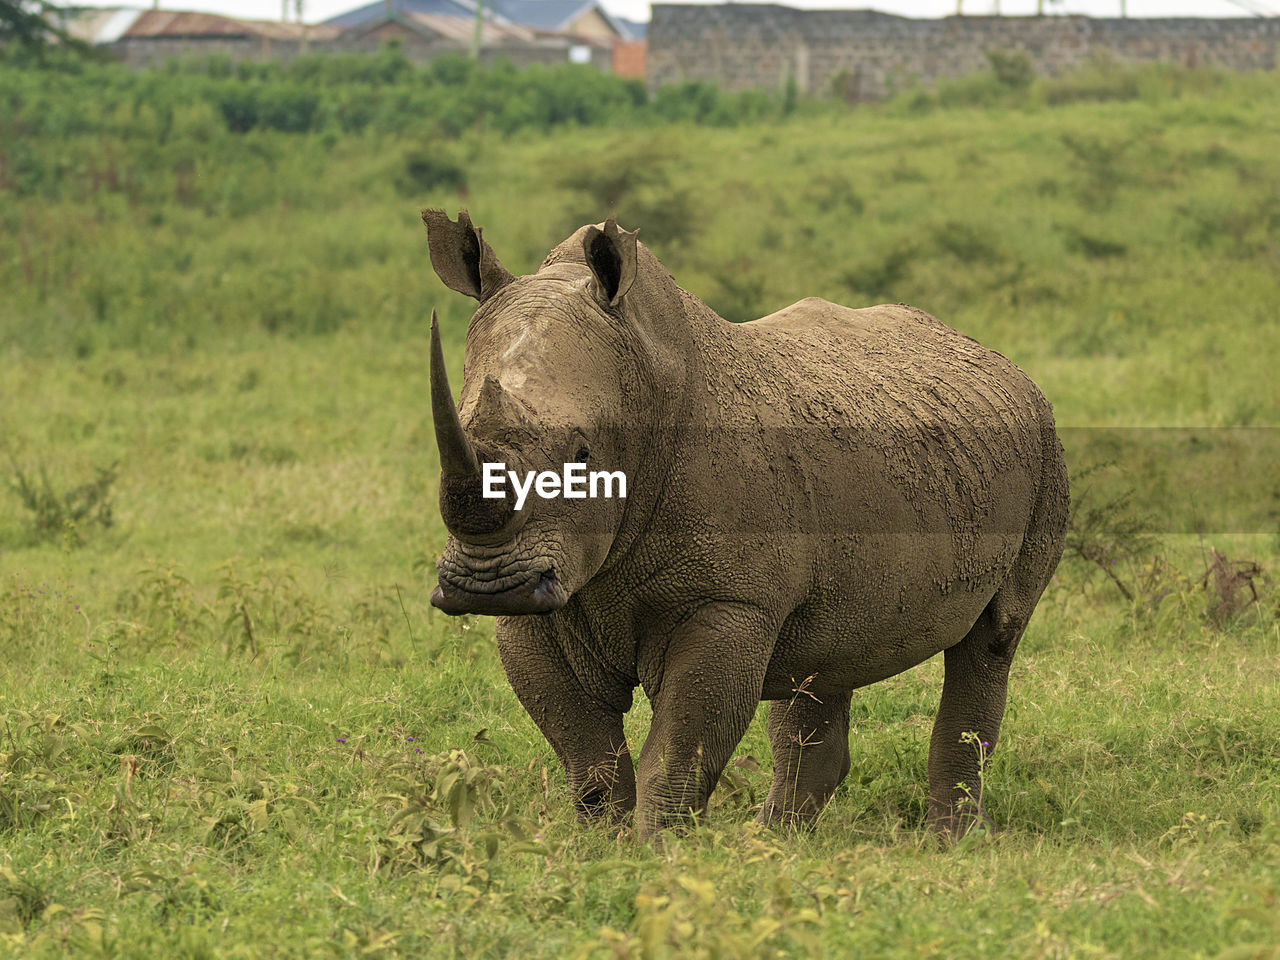 A rhino seen very close to human settlement 